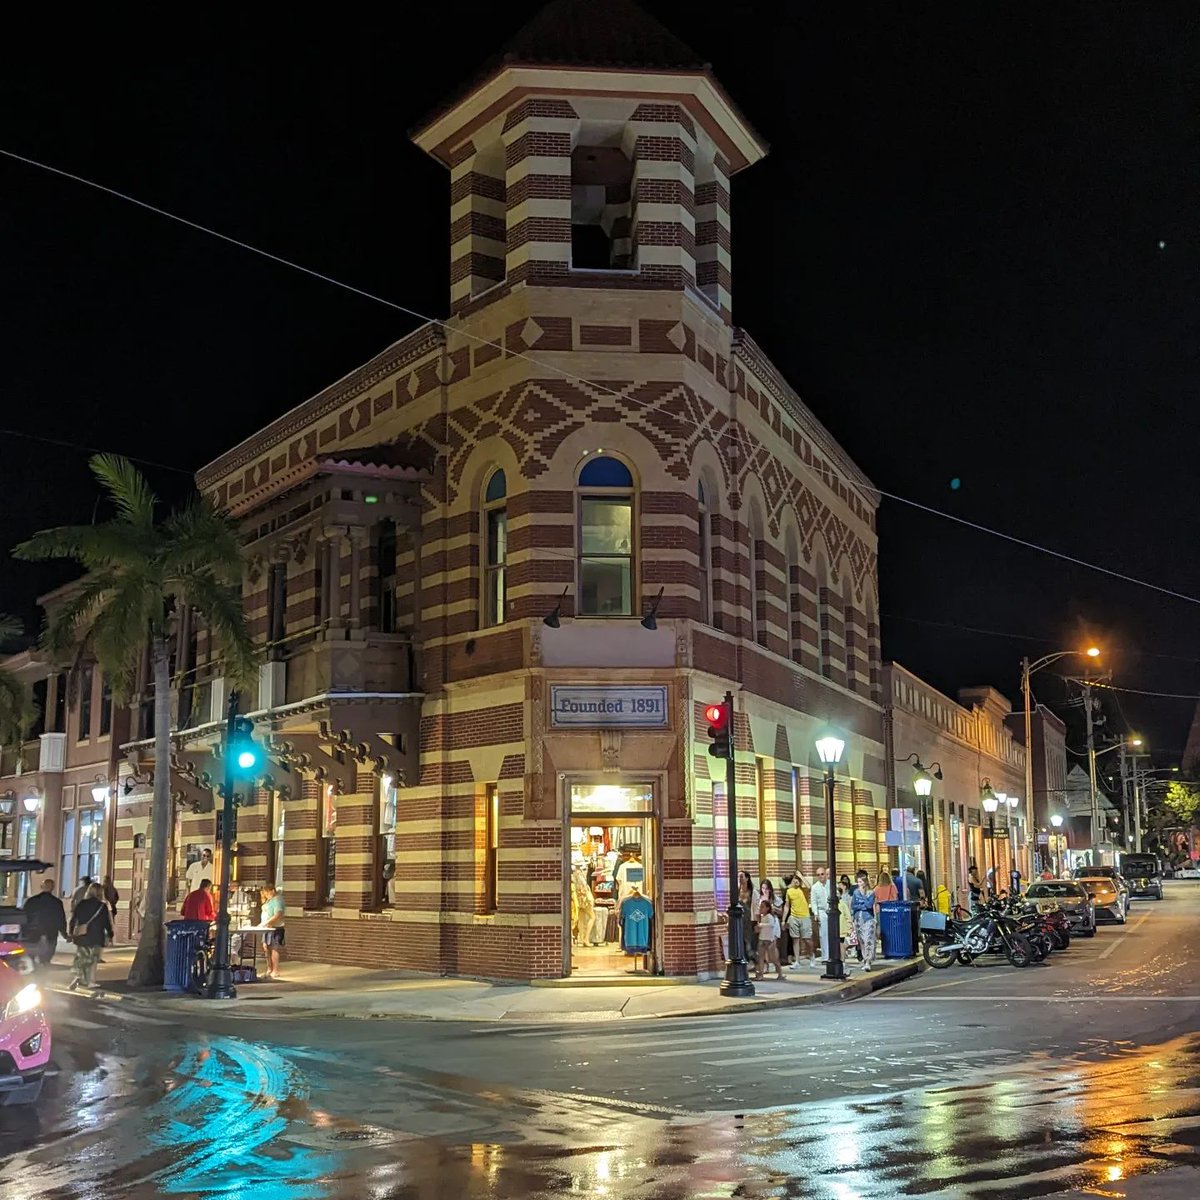 Another chill night in Old Town. #keywest #oldtownkeywest #duvalstreet 📷 @therealrobfrank

More: PartyinKeyWest.com/wp/
Follow us: @PartyInKeyWest
Hashtag us: #PartyInKeyWest